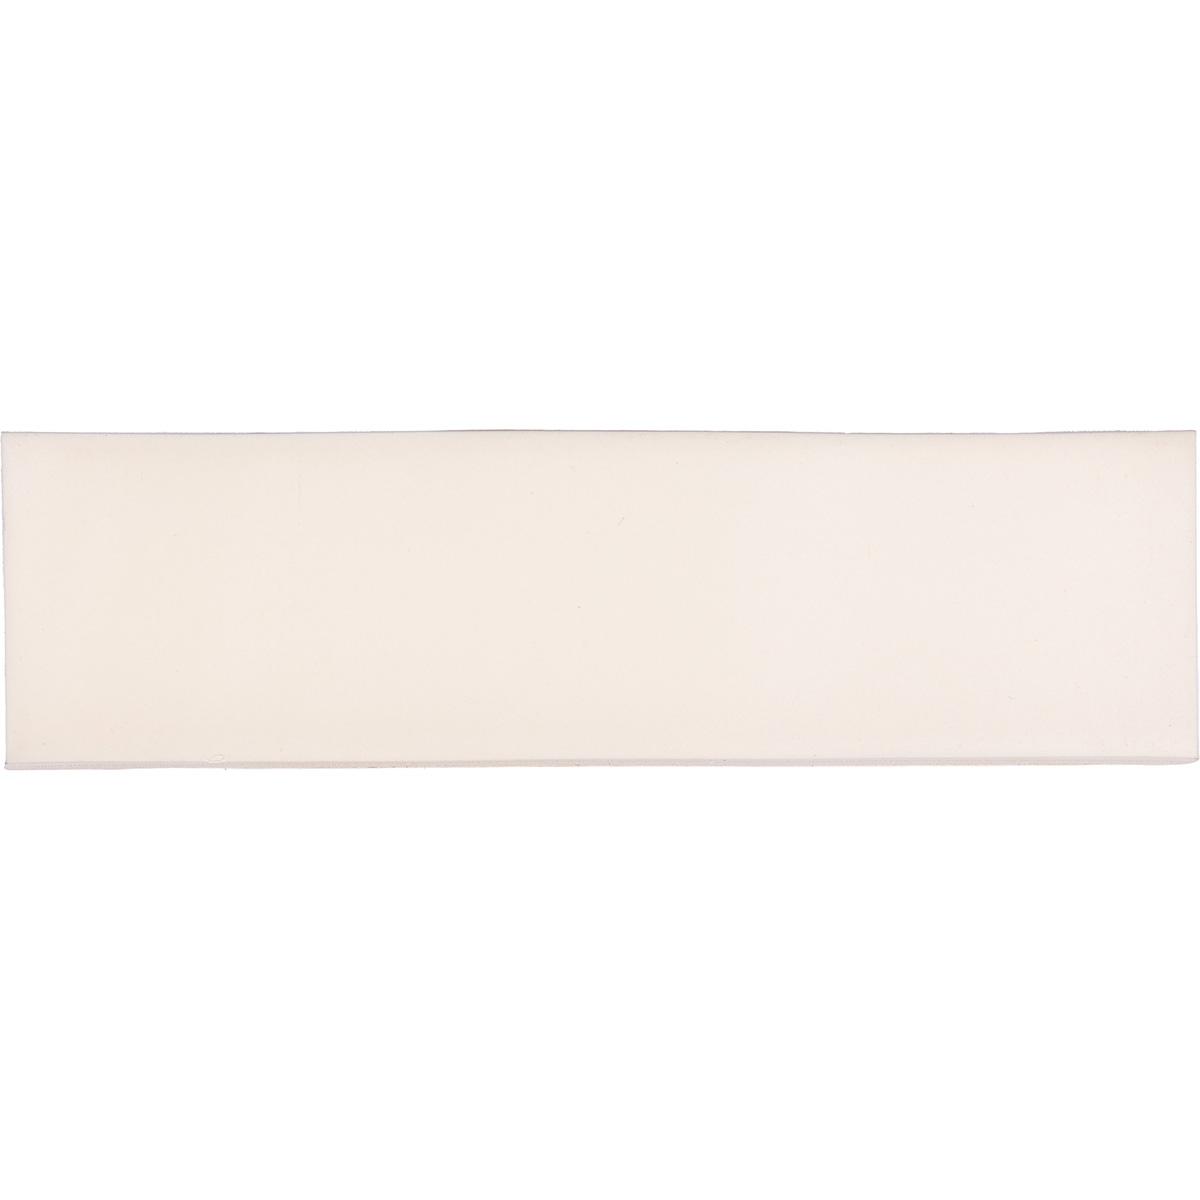 Parchment White Skinny Metro, product variant image